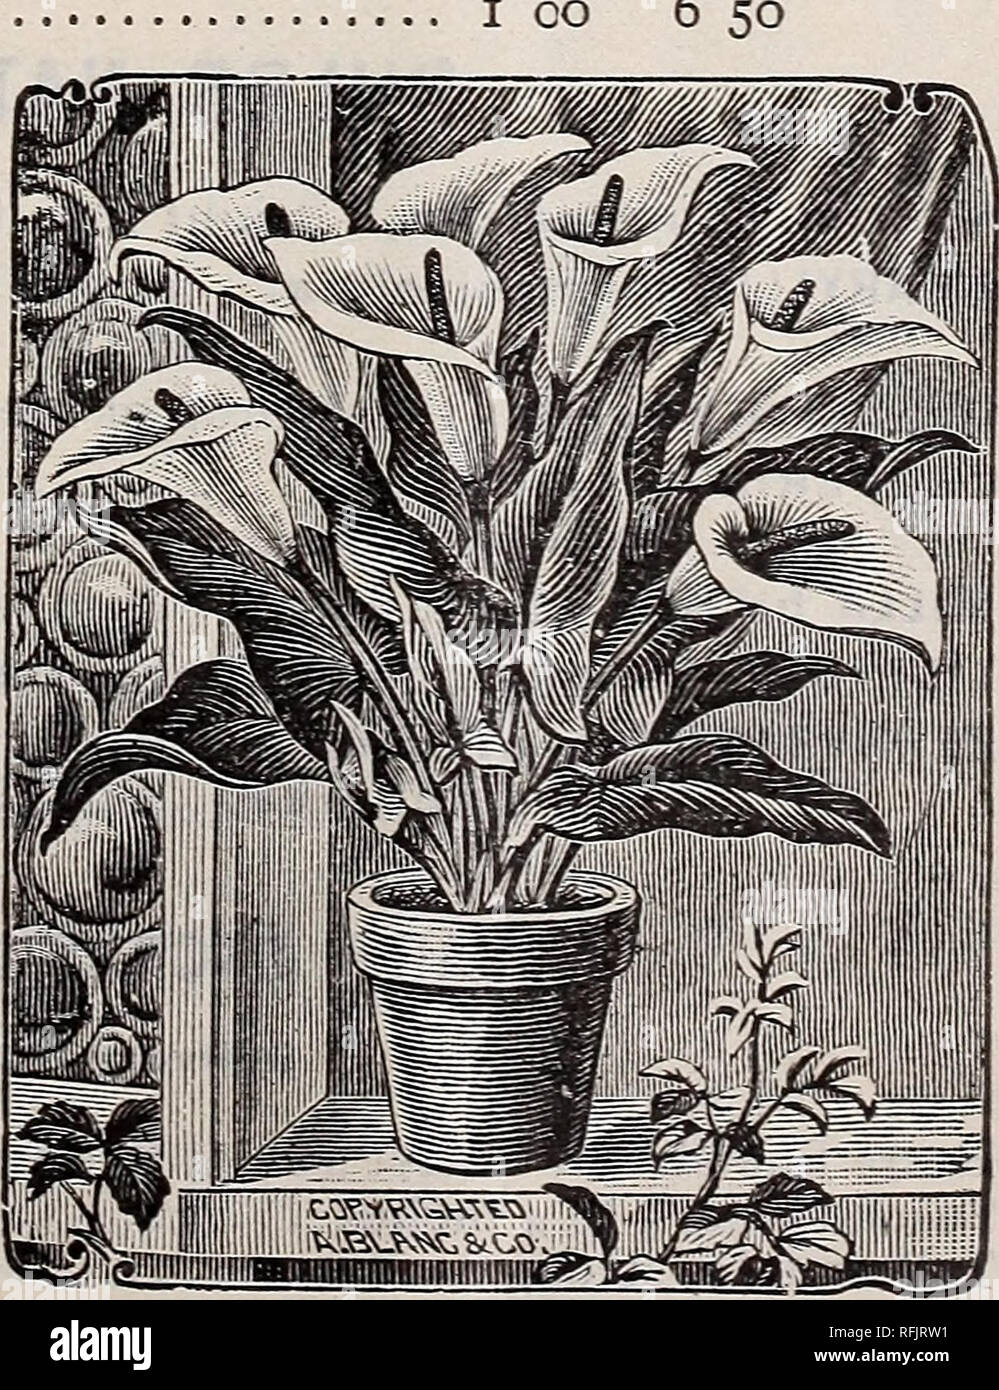 . H. H. Berger &amp; Co.'s price list. Nurseries (Horticulture), California, Catalogs; Flowers, Seeds, Catalogs; Bulbs (Plants), Catalogs. WHOLESALE CATALOGUE OF BULBS, SEEDS AND PLANTS. 5 Various Bulbs and Flowering Roots. ALLIUM Neapolitanum . .$o 10 AMARYLLIS Belladonna I 20 &quot; vittata Hybrids each, 50 cts... 5 00 ANEMONE coronaria. Single mixed 25 «' 44 Double mixed 25 44 fulgens 40 BEGONIA (Tuberous-rooted)— Single, in separate colors. White, Rose-pink, Orange, Yellow or Scarlet. Large bulbs 44 Mixed. All colors Double, in separate colors. White, Orange, Yellow, Scar let Rose 14 Mixed Stock Photo